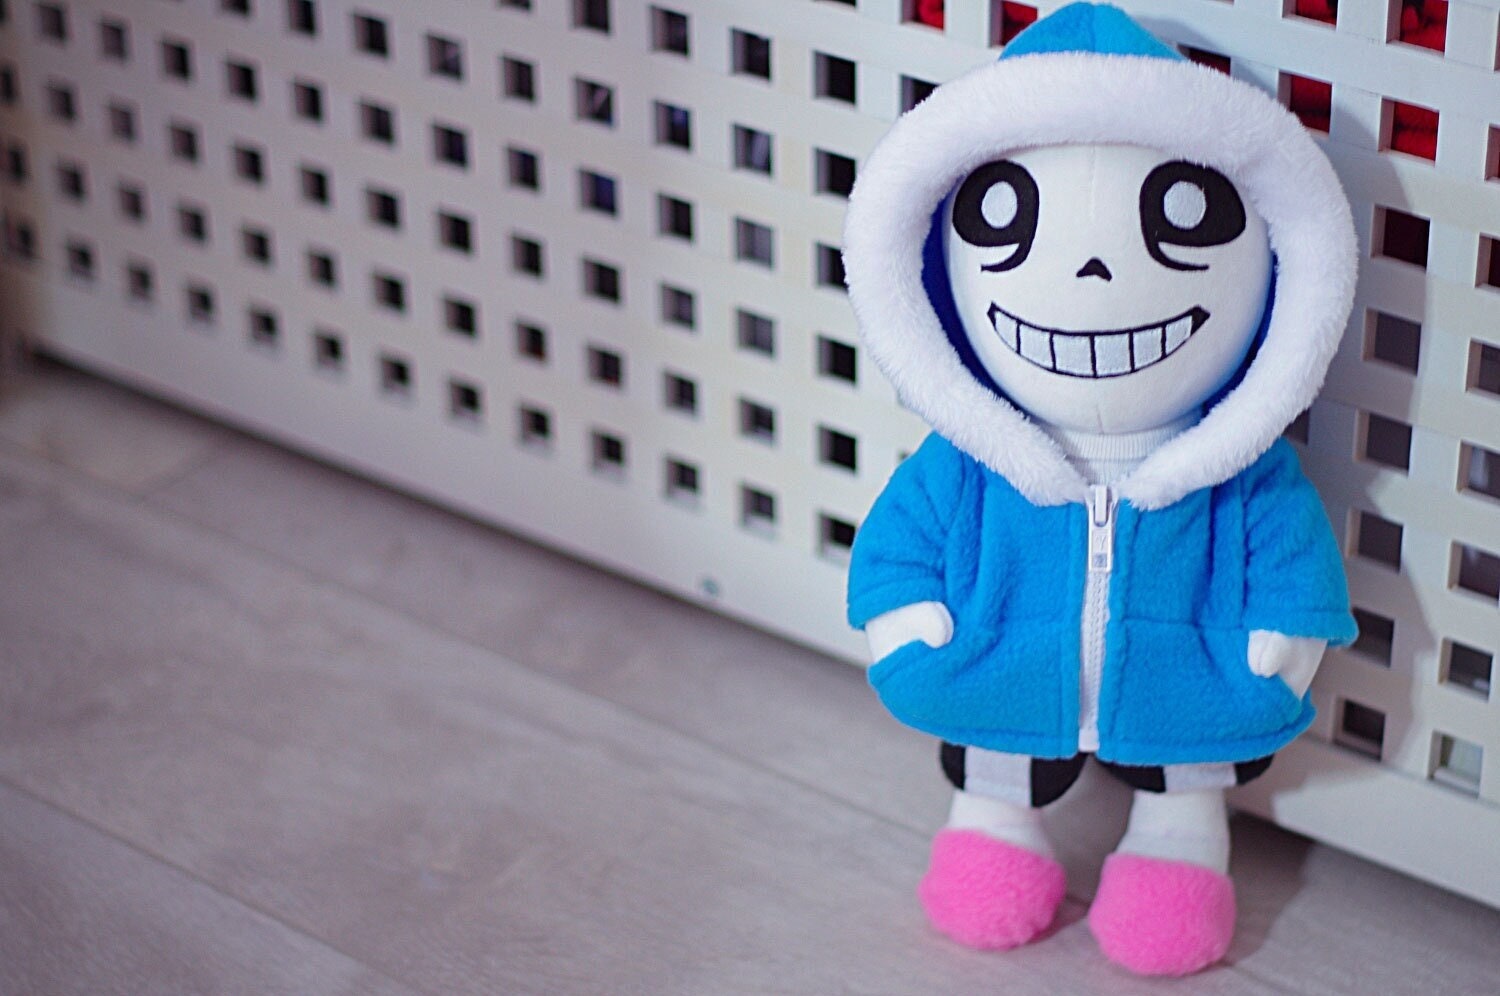 😍Undertale Cross Sans Dream Sans Ink Sans Cosplay Costume Shoes Wig  available for you…